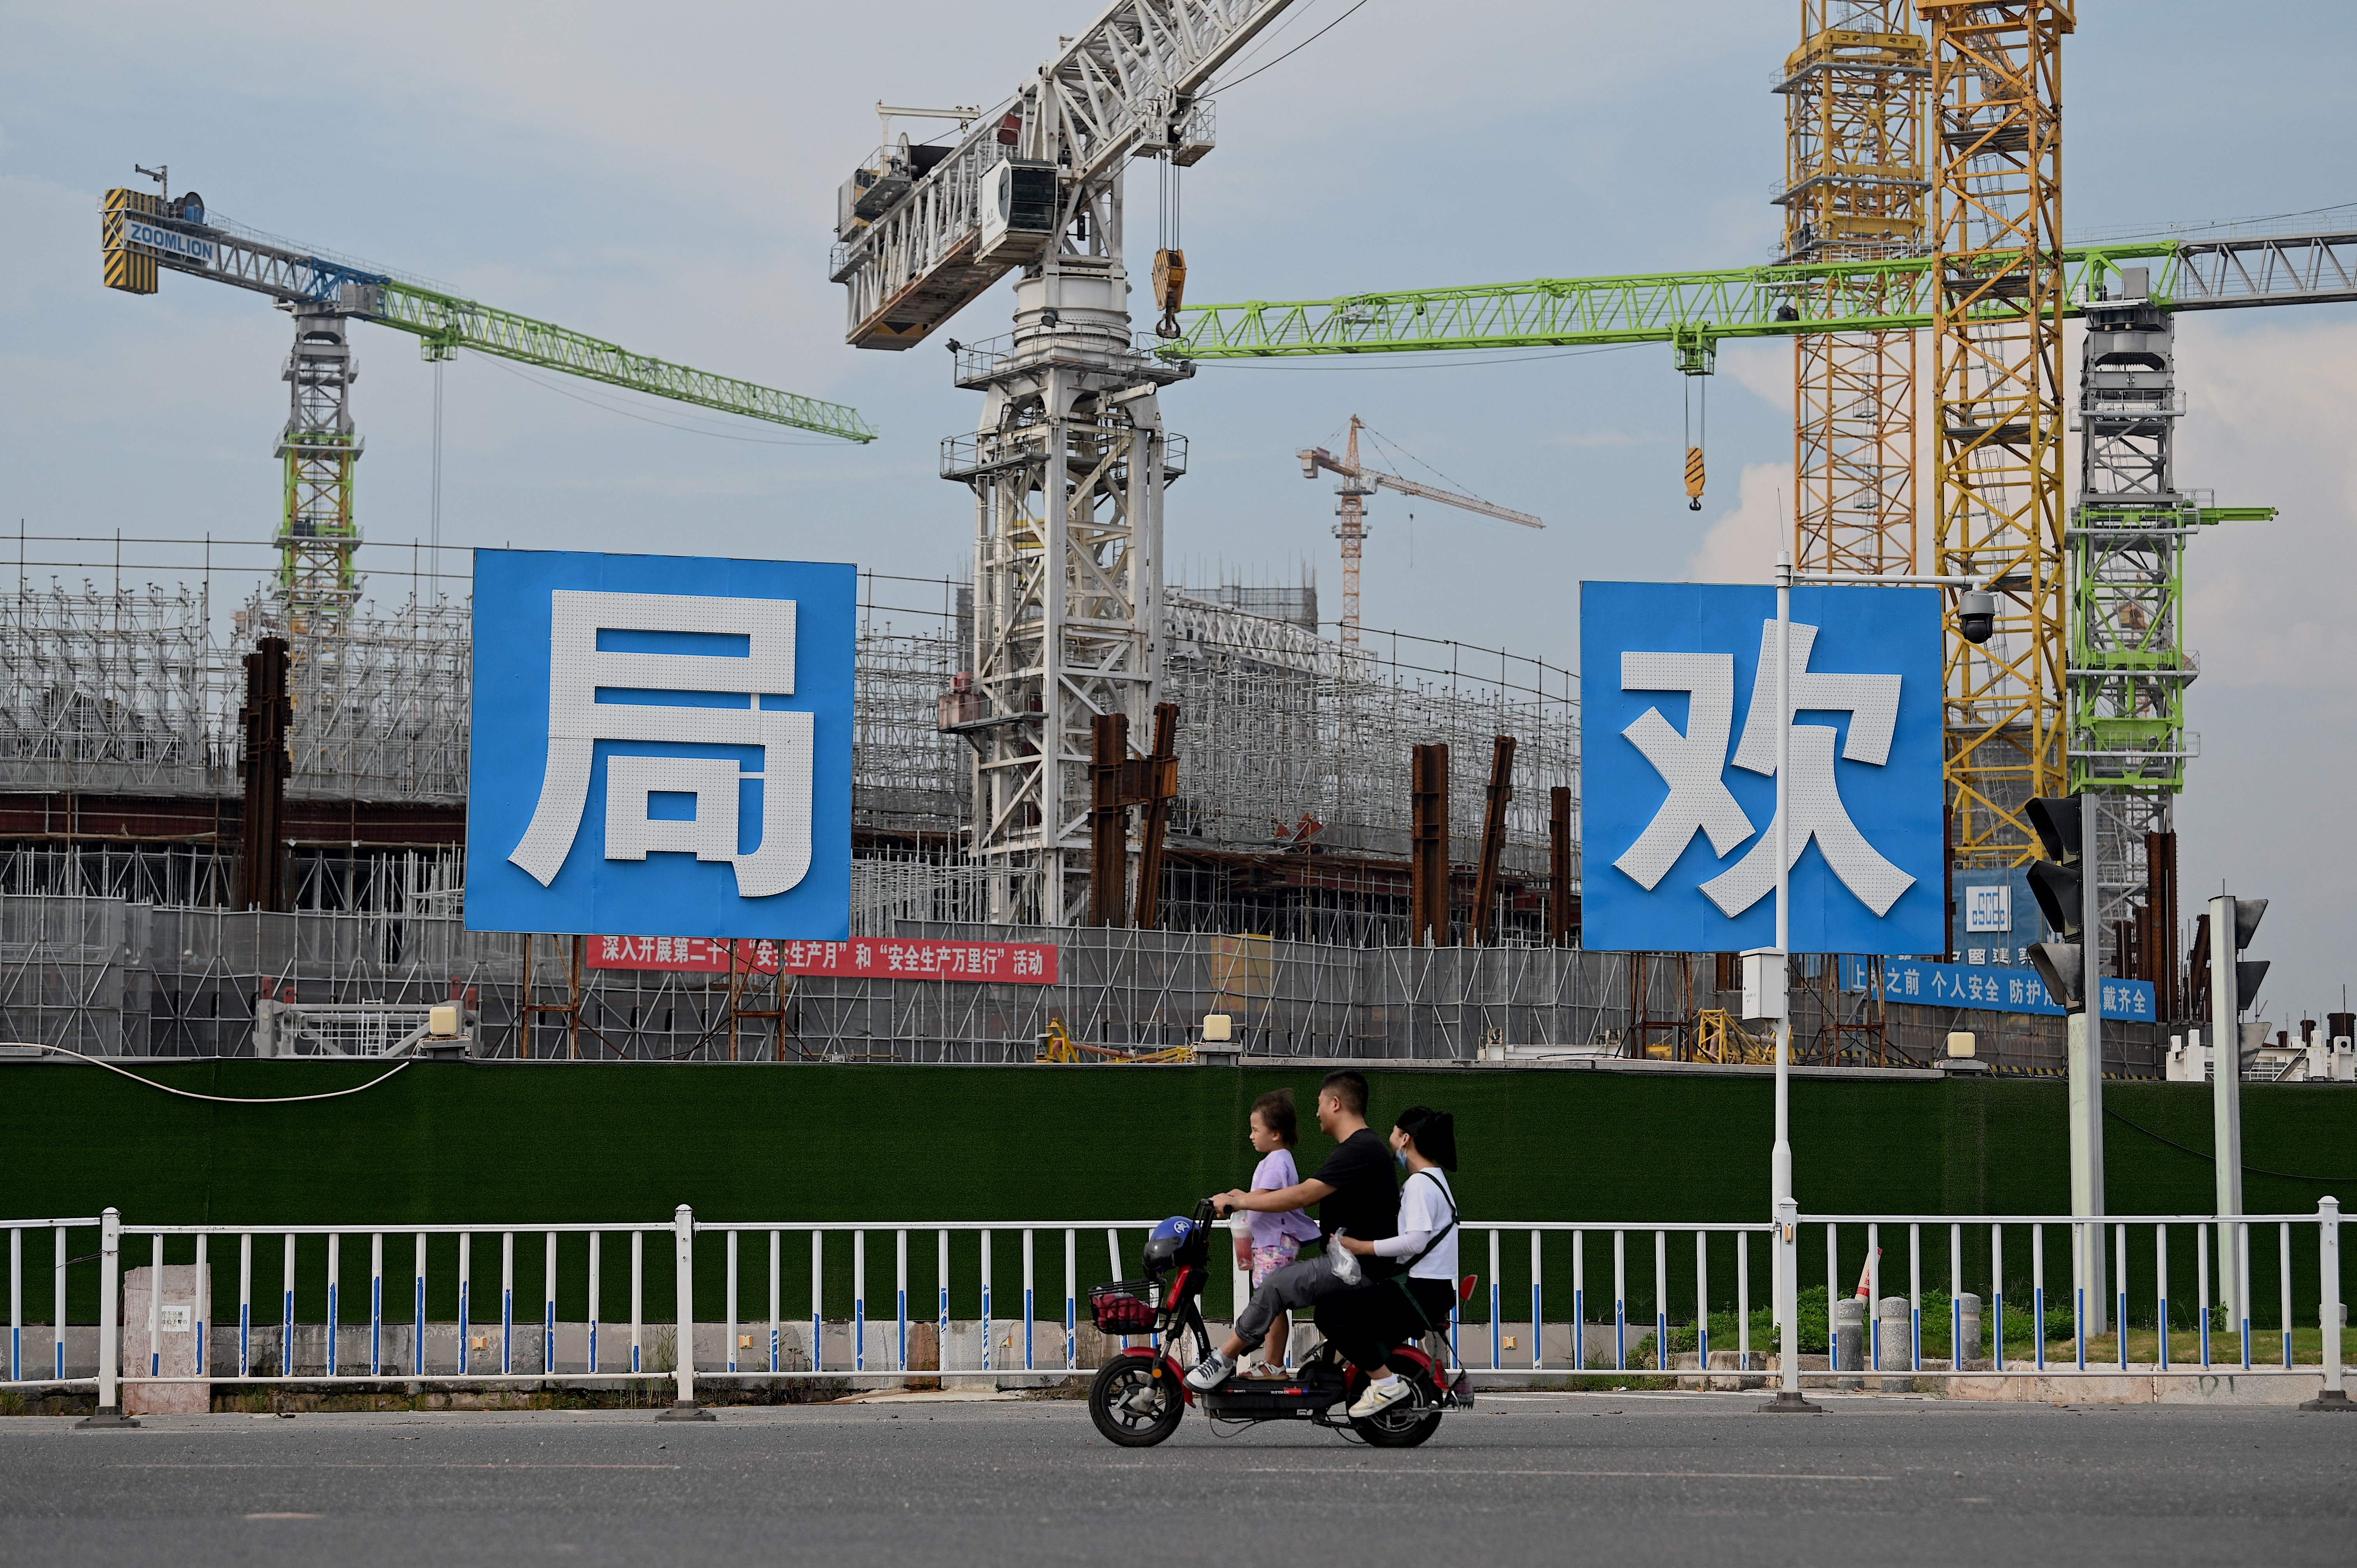 People commute in front of the under-construction Guangzhou Evergrande football stadium in Guangzhou, China’s southern Guangdong province